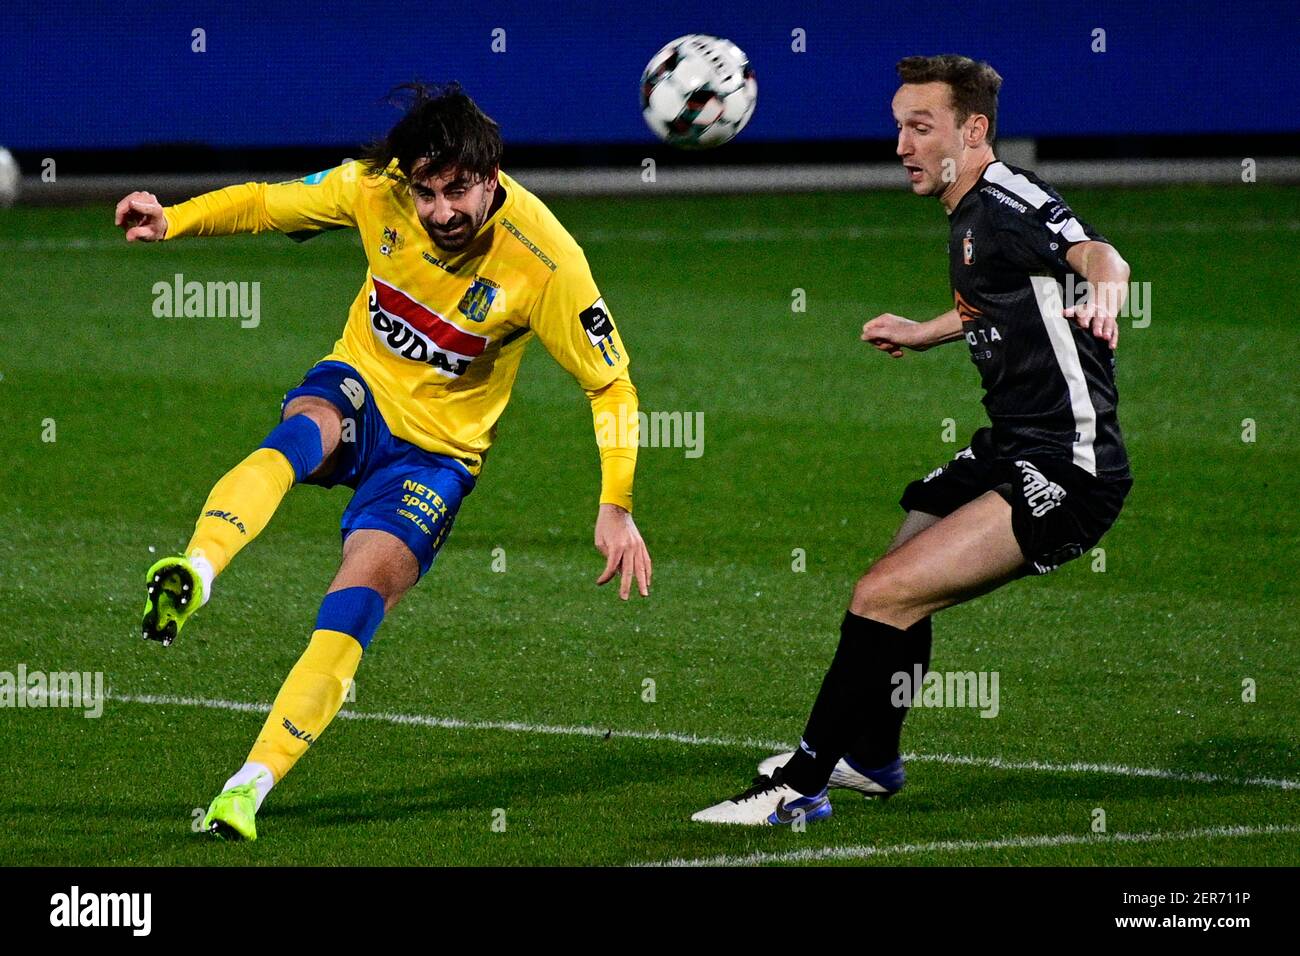 Deinze's Niels De Schutter fight for the ball during a soccer match between KVC Westerlo and KMSK Deinze, Sunday 28 February 2021 in Westerlo, on day Stock Photo